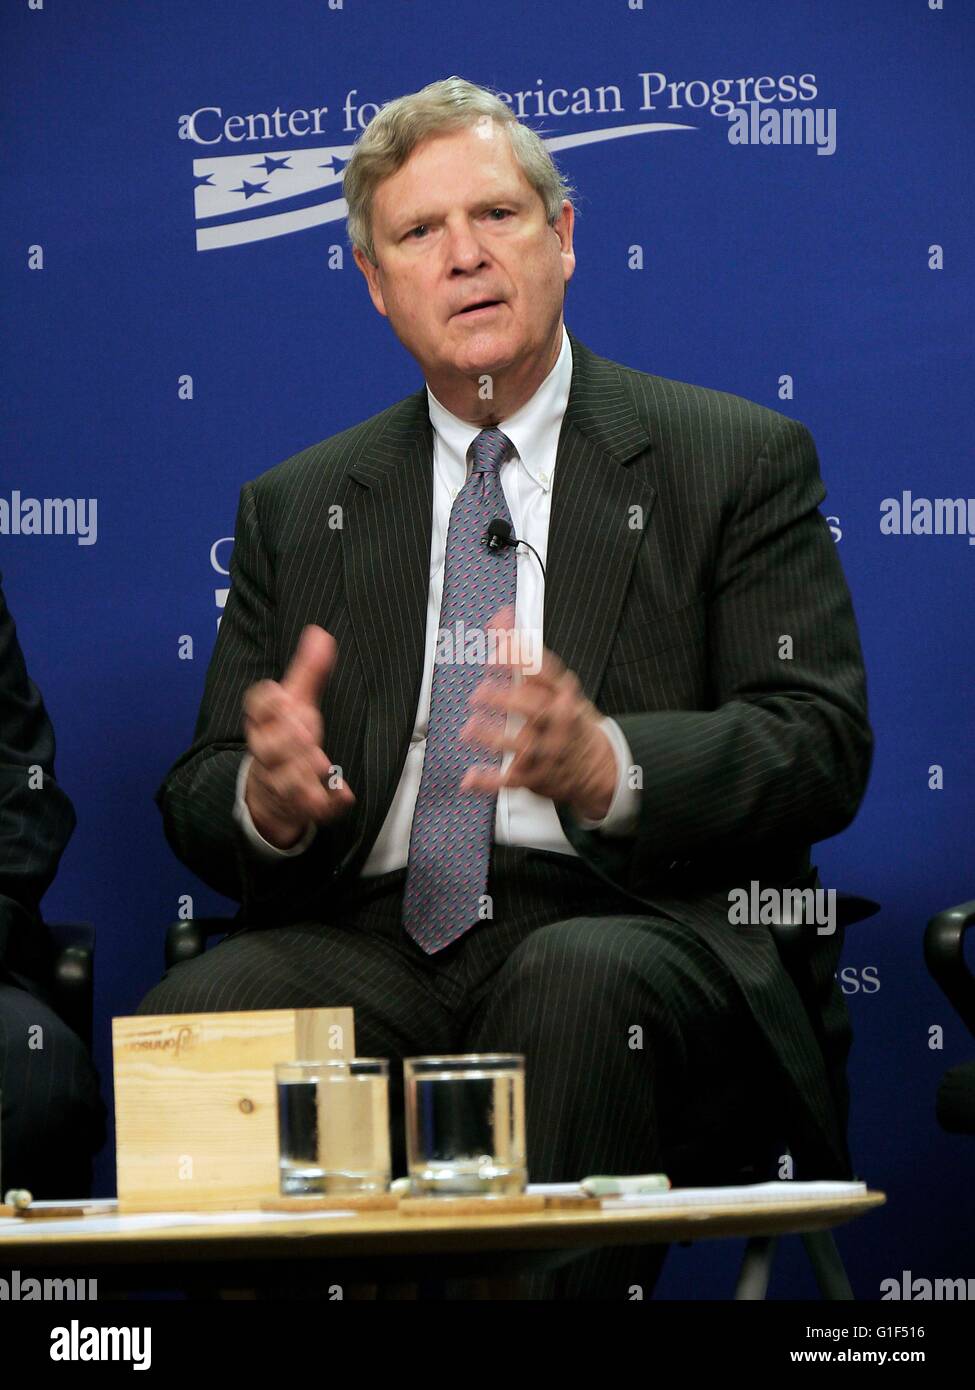 US Agriculture Secretary Tom Vilsack during a panel discussion following his announcement on major new investment in conservation practices at the Center for American Progress May 12, 2016 in Washington, DC. Stock Photo